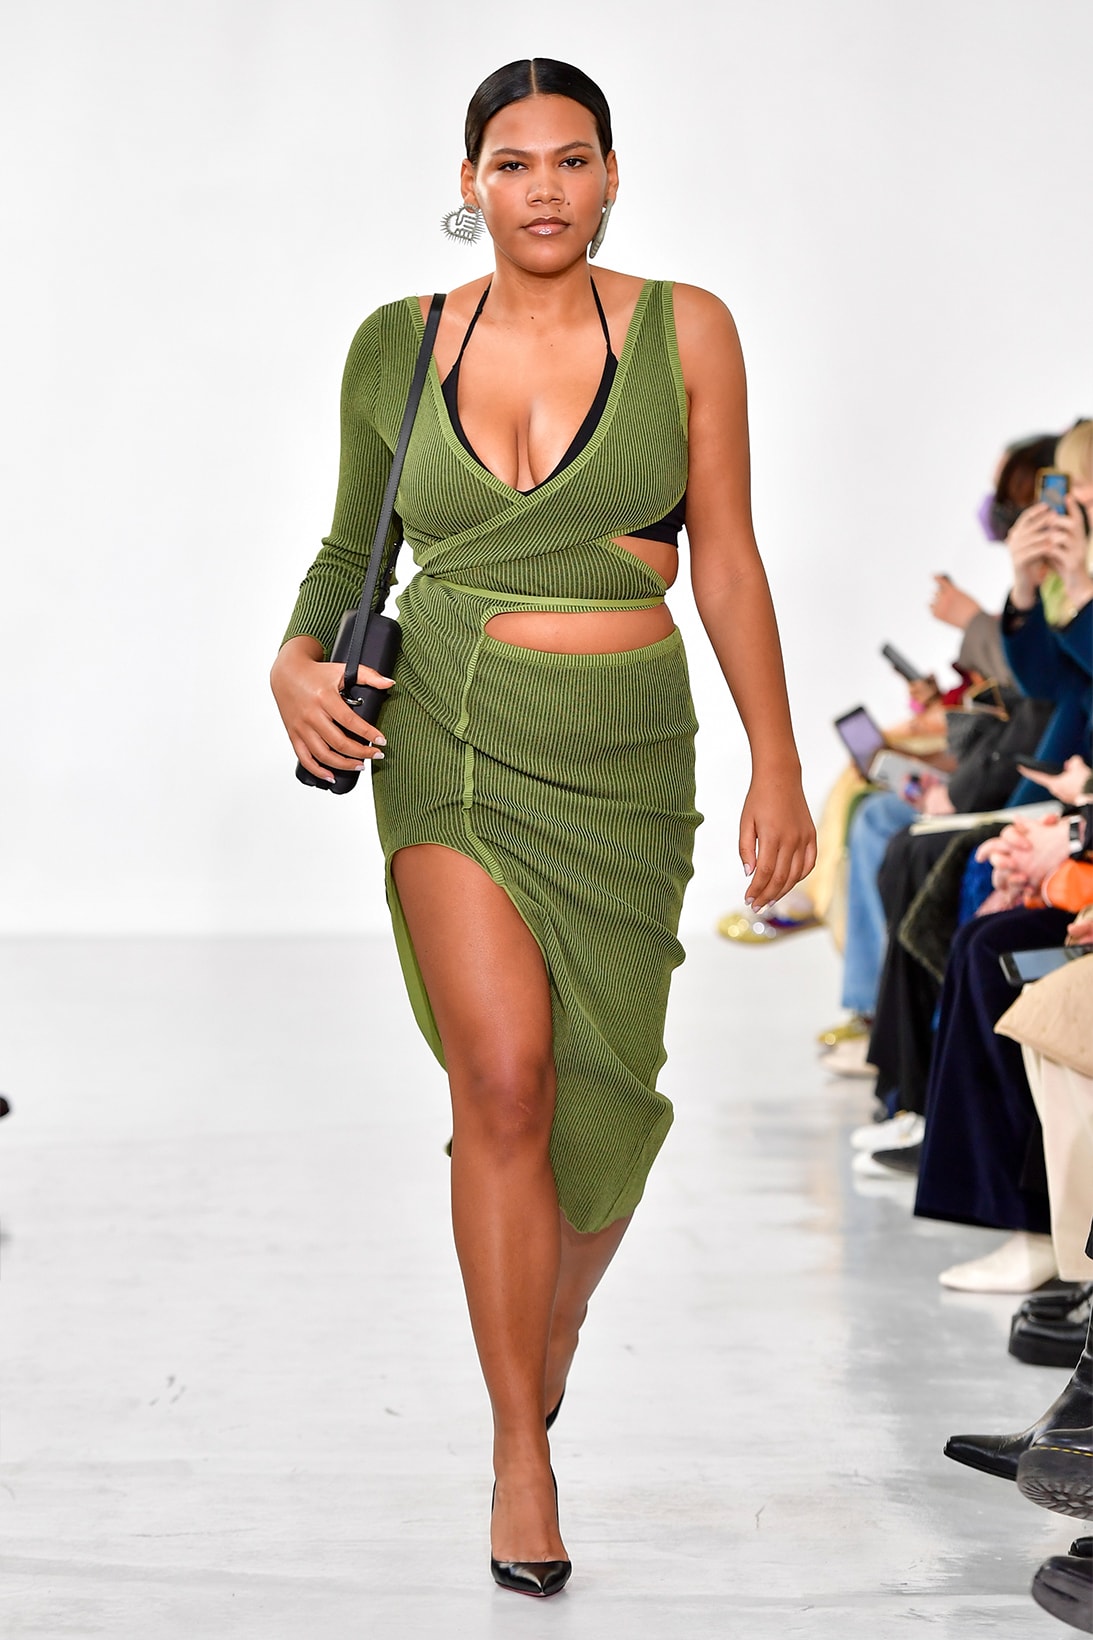 Ester Manas Fall Winter Collection Size Inclusivity Cut-Outs Fashion Week Runway Show Photos Striped Dress Green